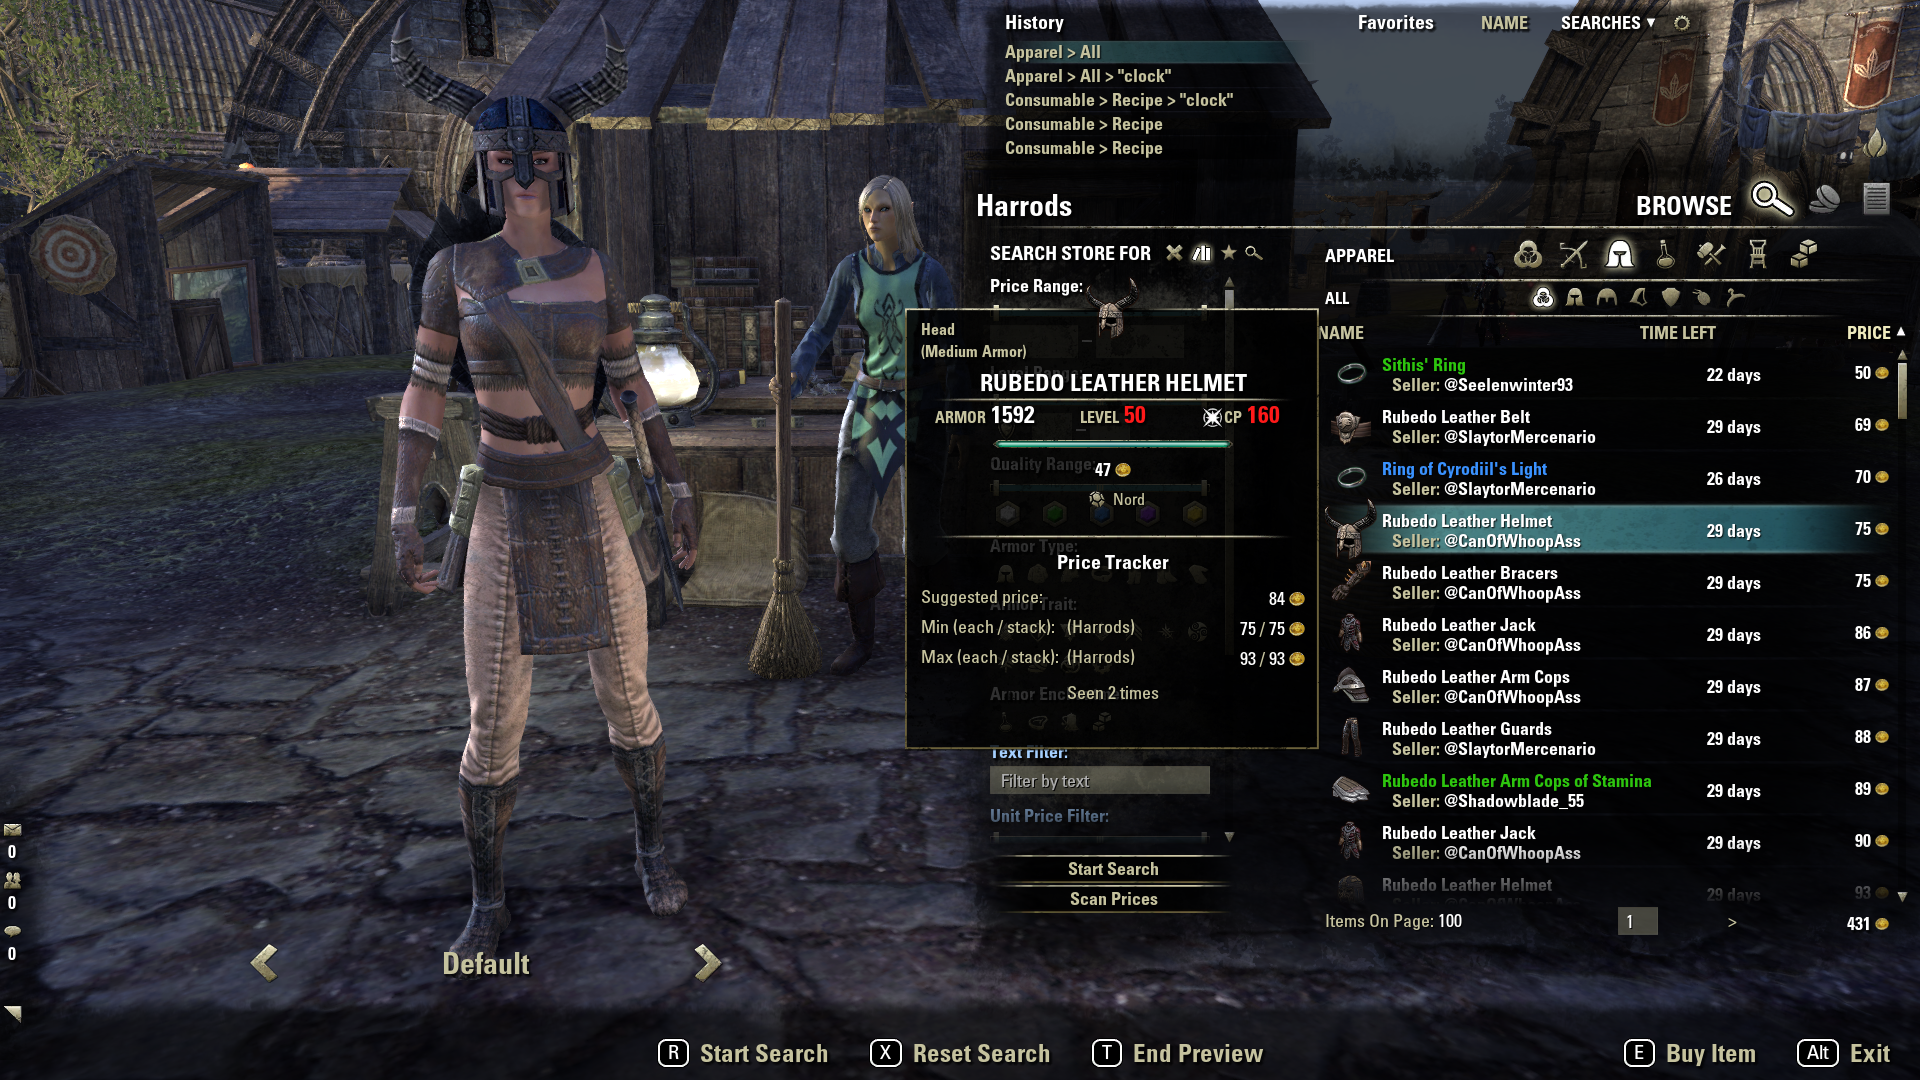 Elder Scrolls Online recommends third-party auction forum for trading